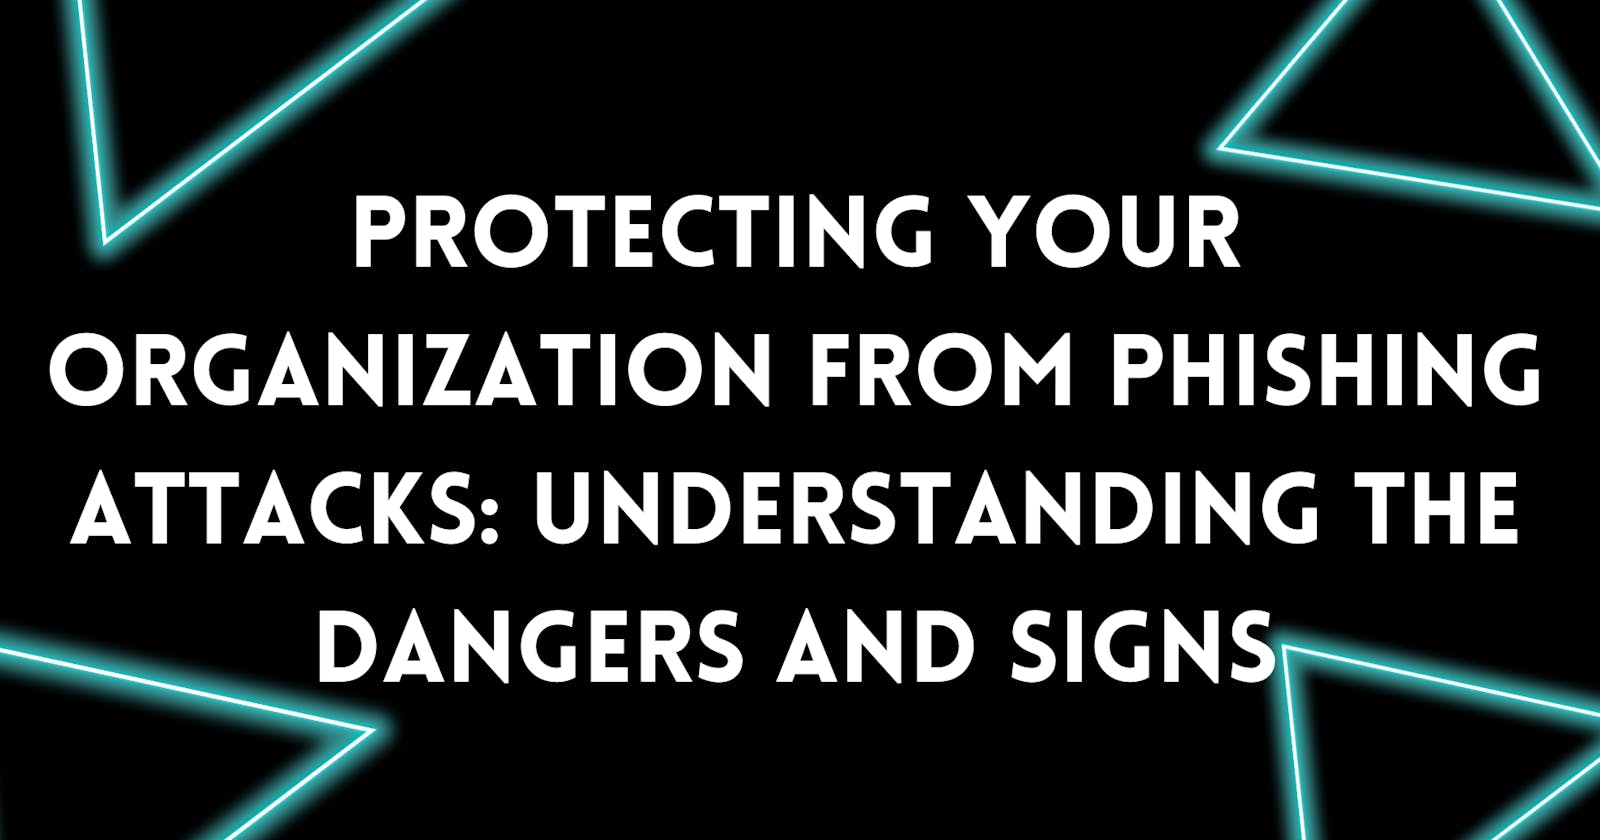 Protecting Your Organization from Phishing Attacks: Understanding the Dangers and Signs